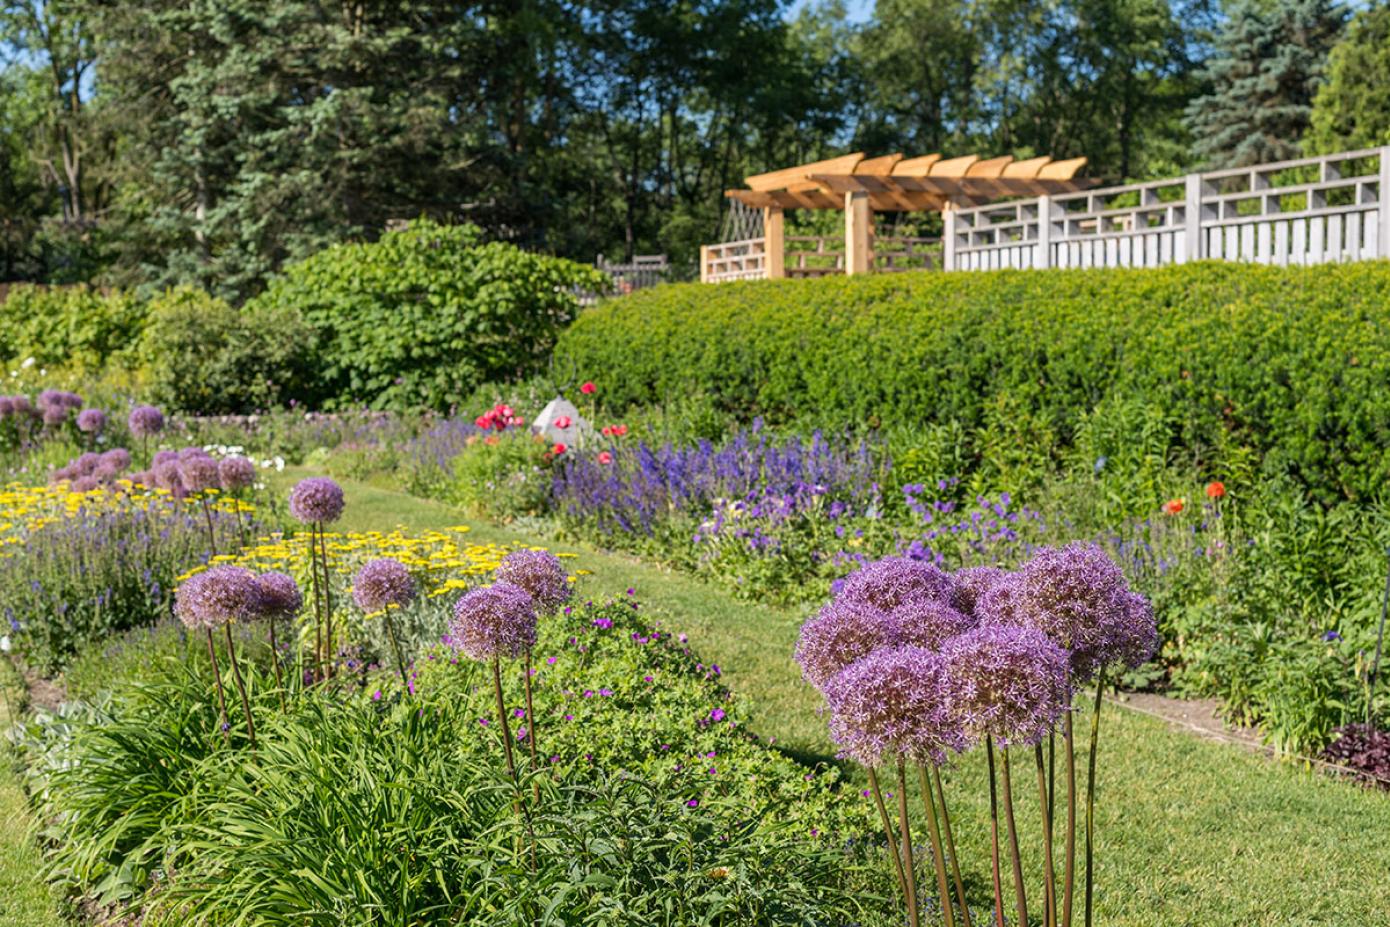 South view of the garden with flowers in foreground